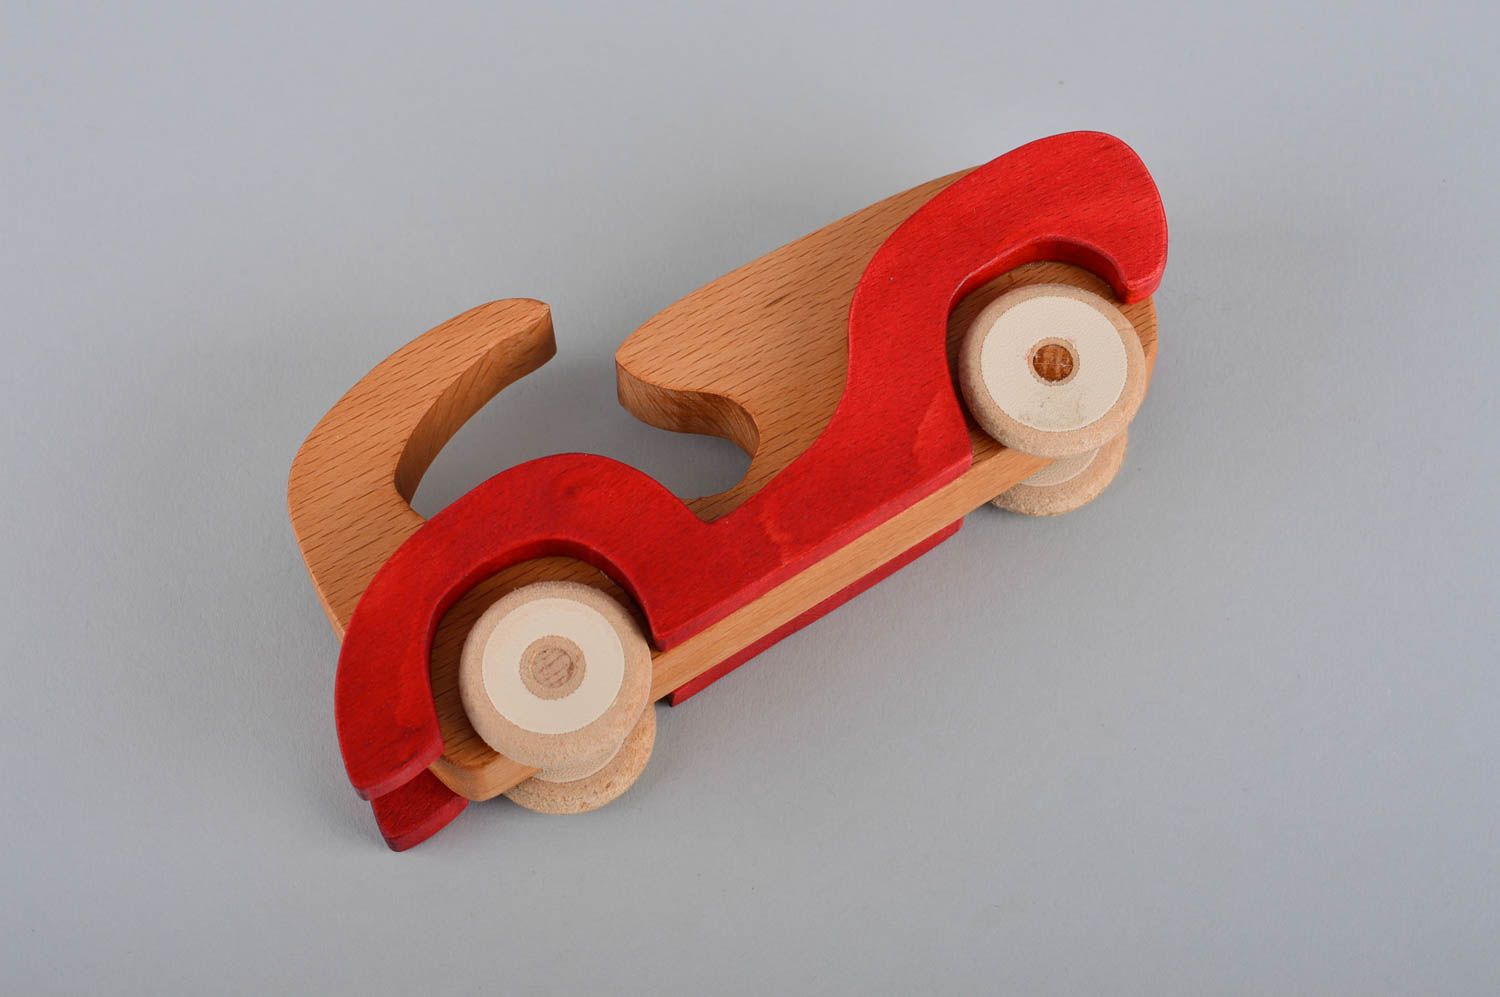 Handmade toy wooden toy for children nursery decor ideas gift for baby photo 5